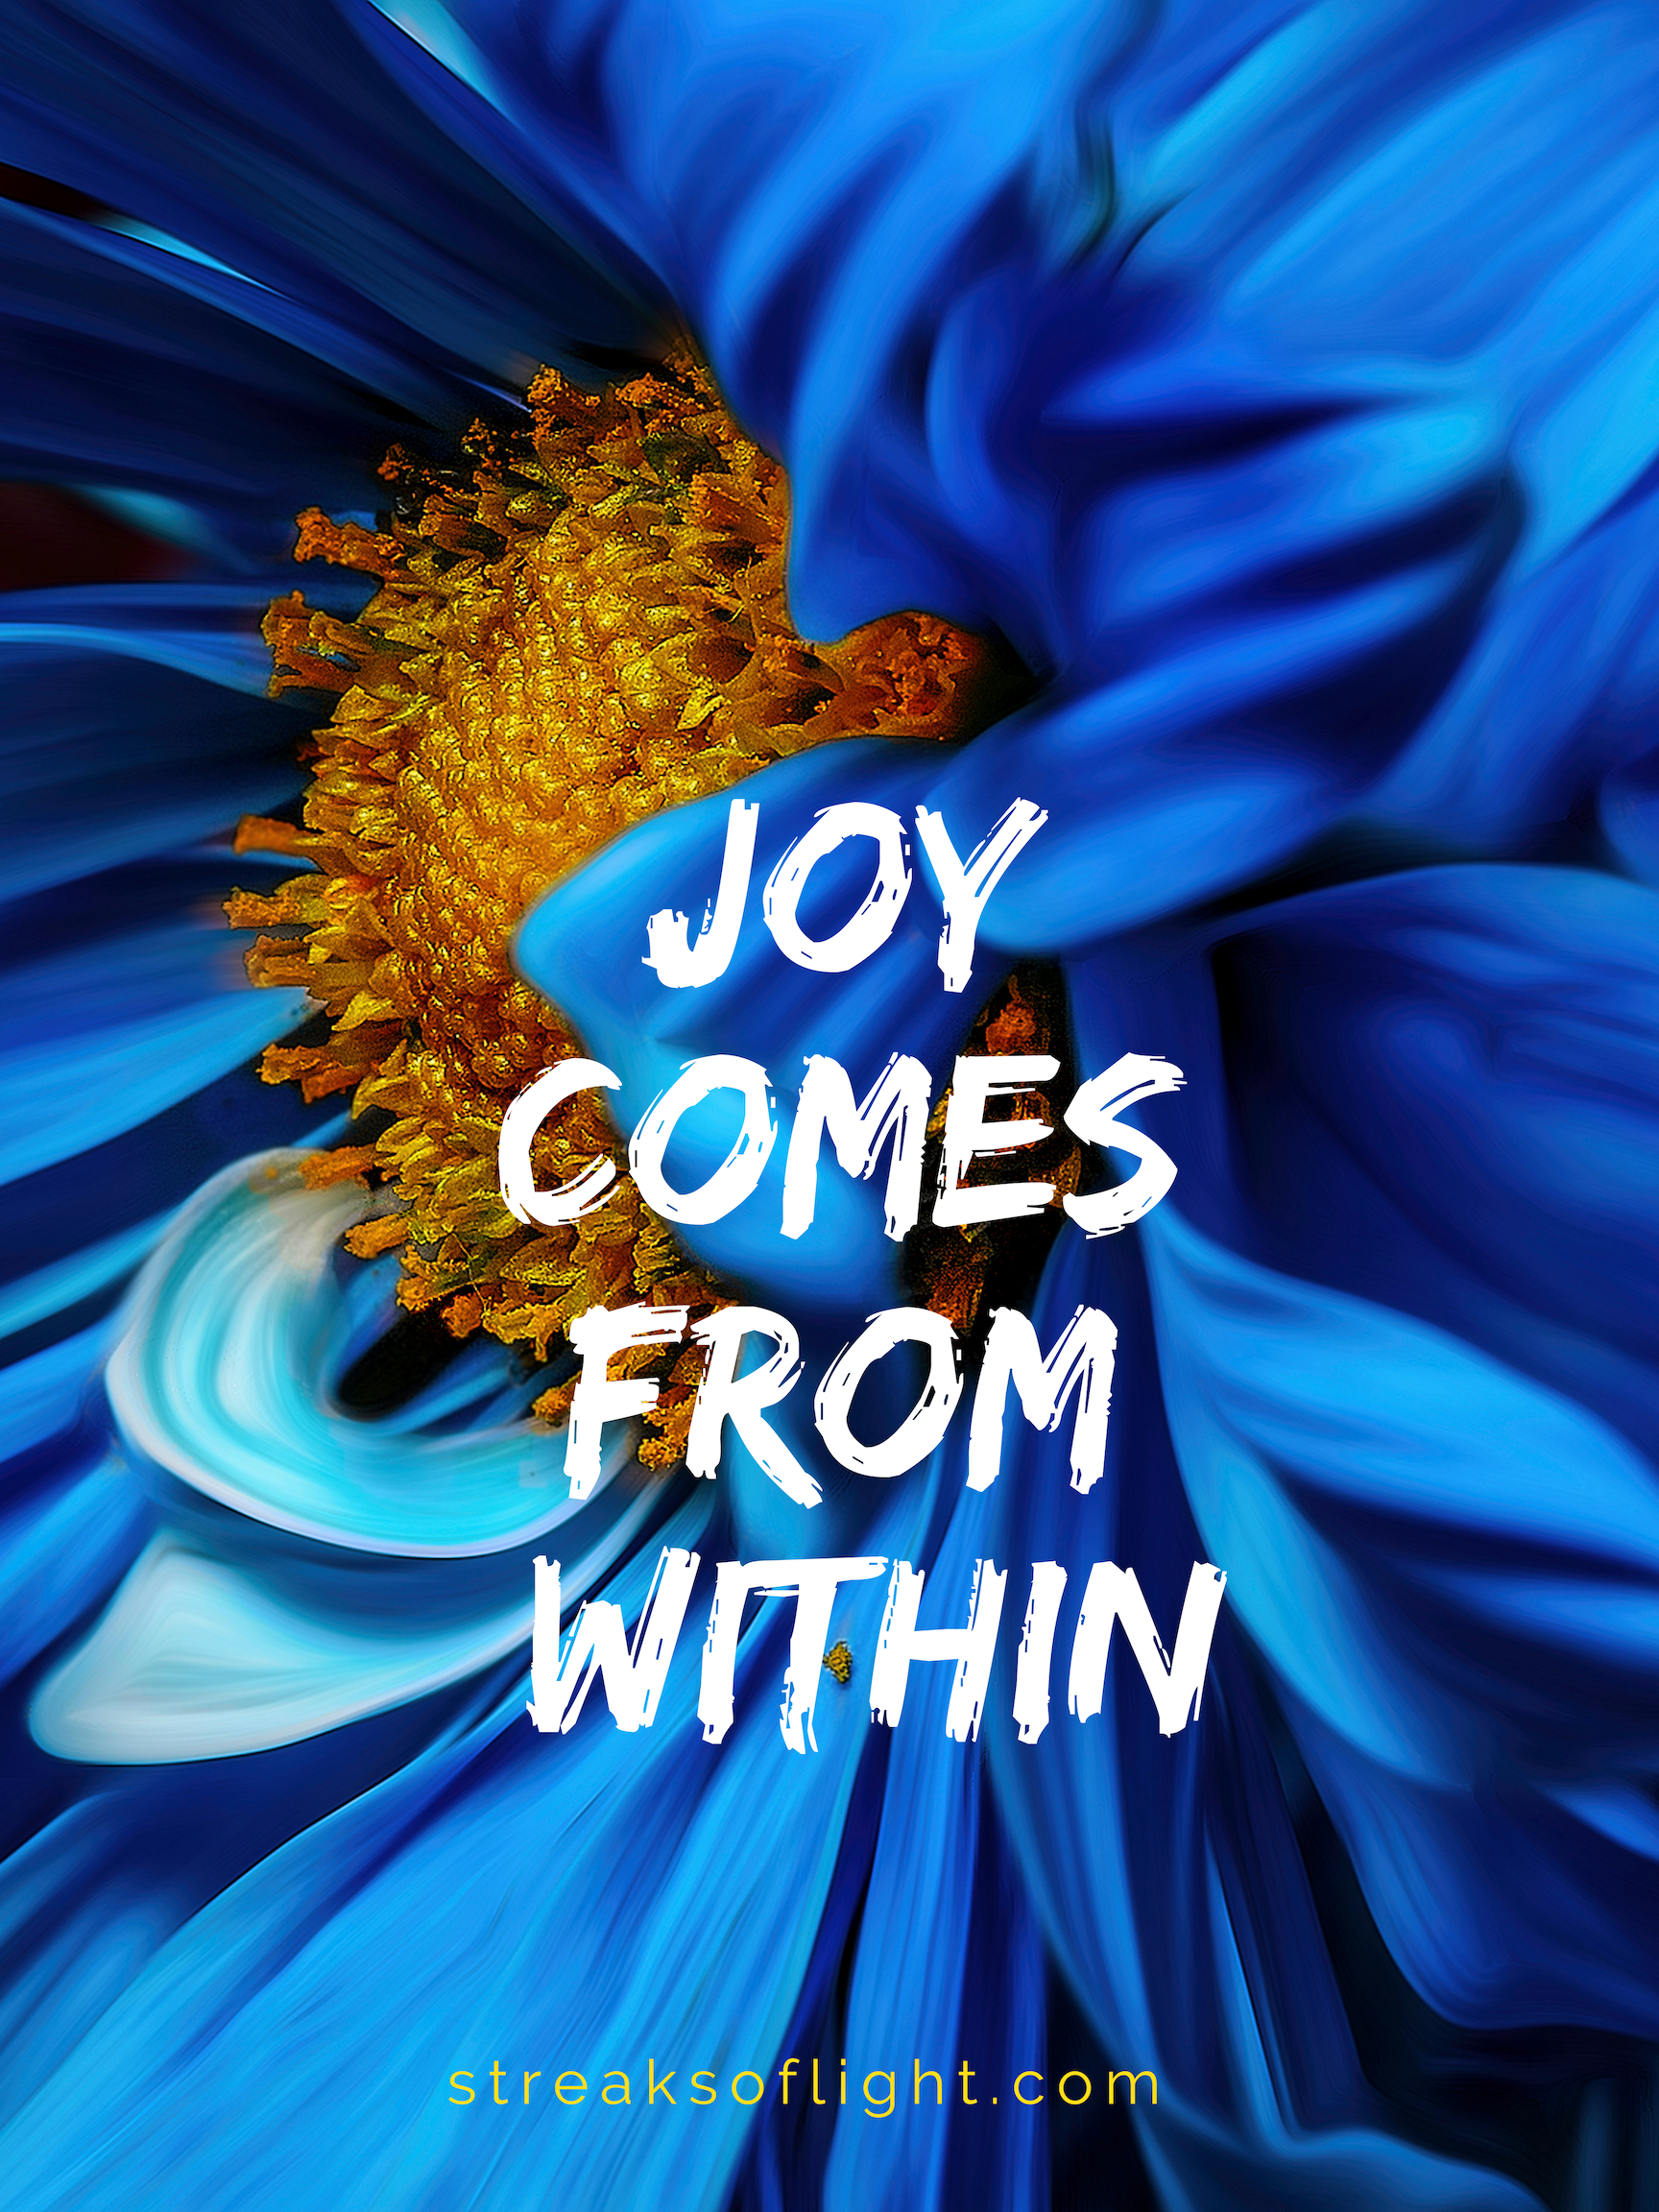 Joy comes from within. Counting your blessings will help you find joy despite the difficulties you may be facing.